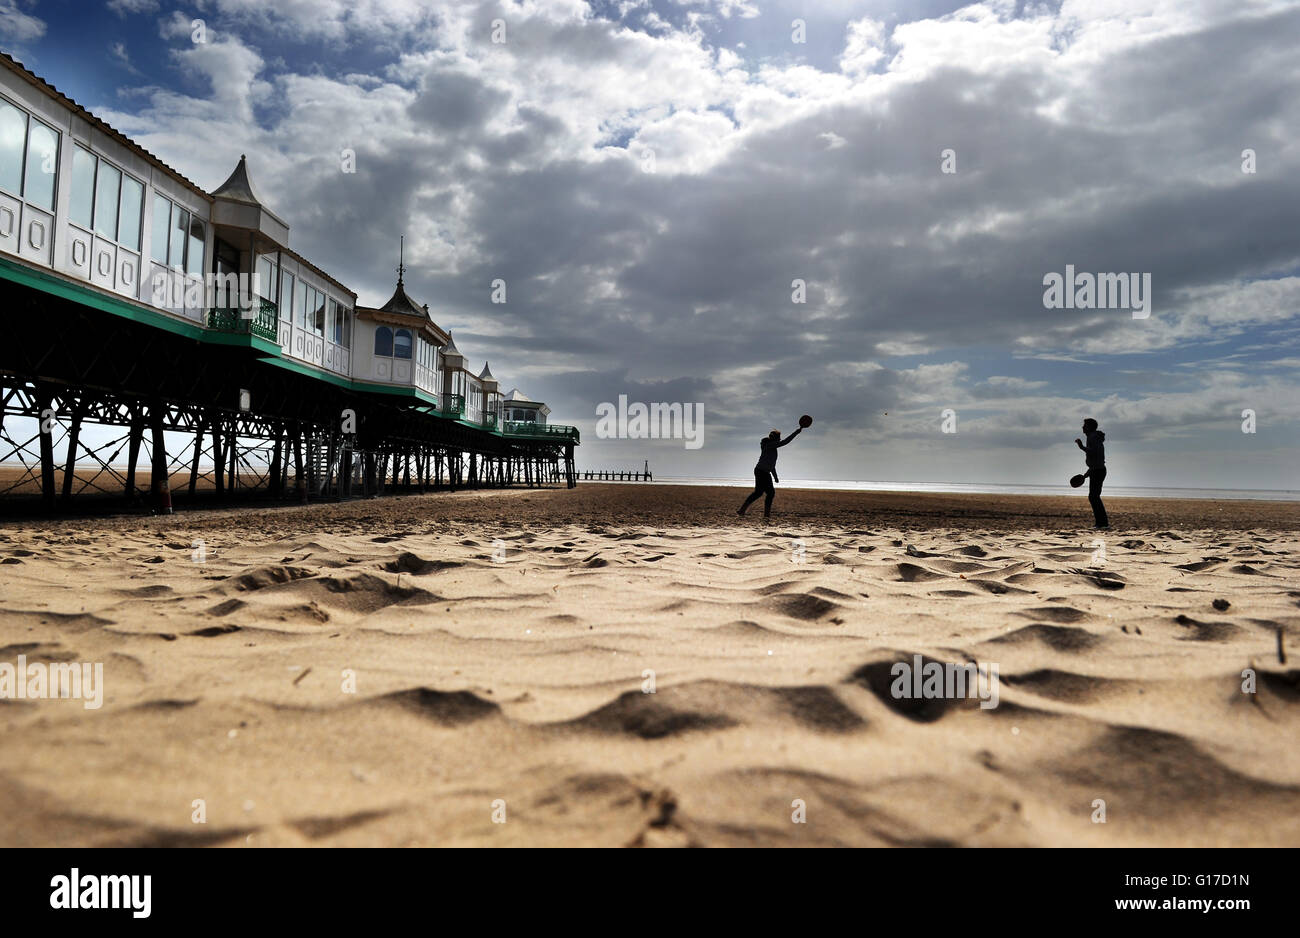 Quiet spring day on the beach at Lytham St Anne's, Lancashire. Picture by Paul Heyes, Monday May 02, 2016. Stock Photo